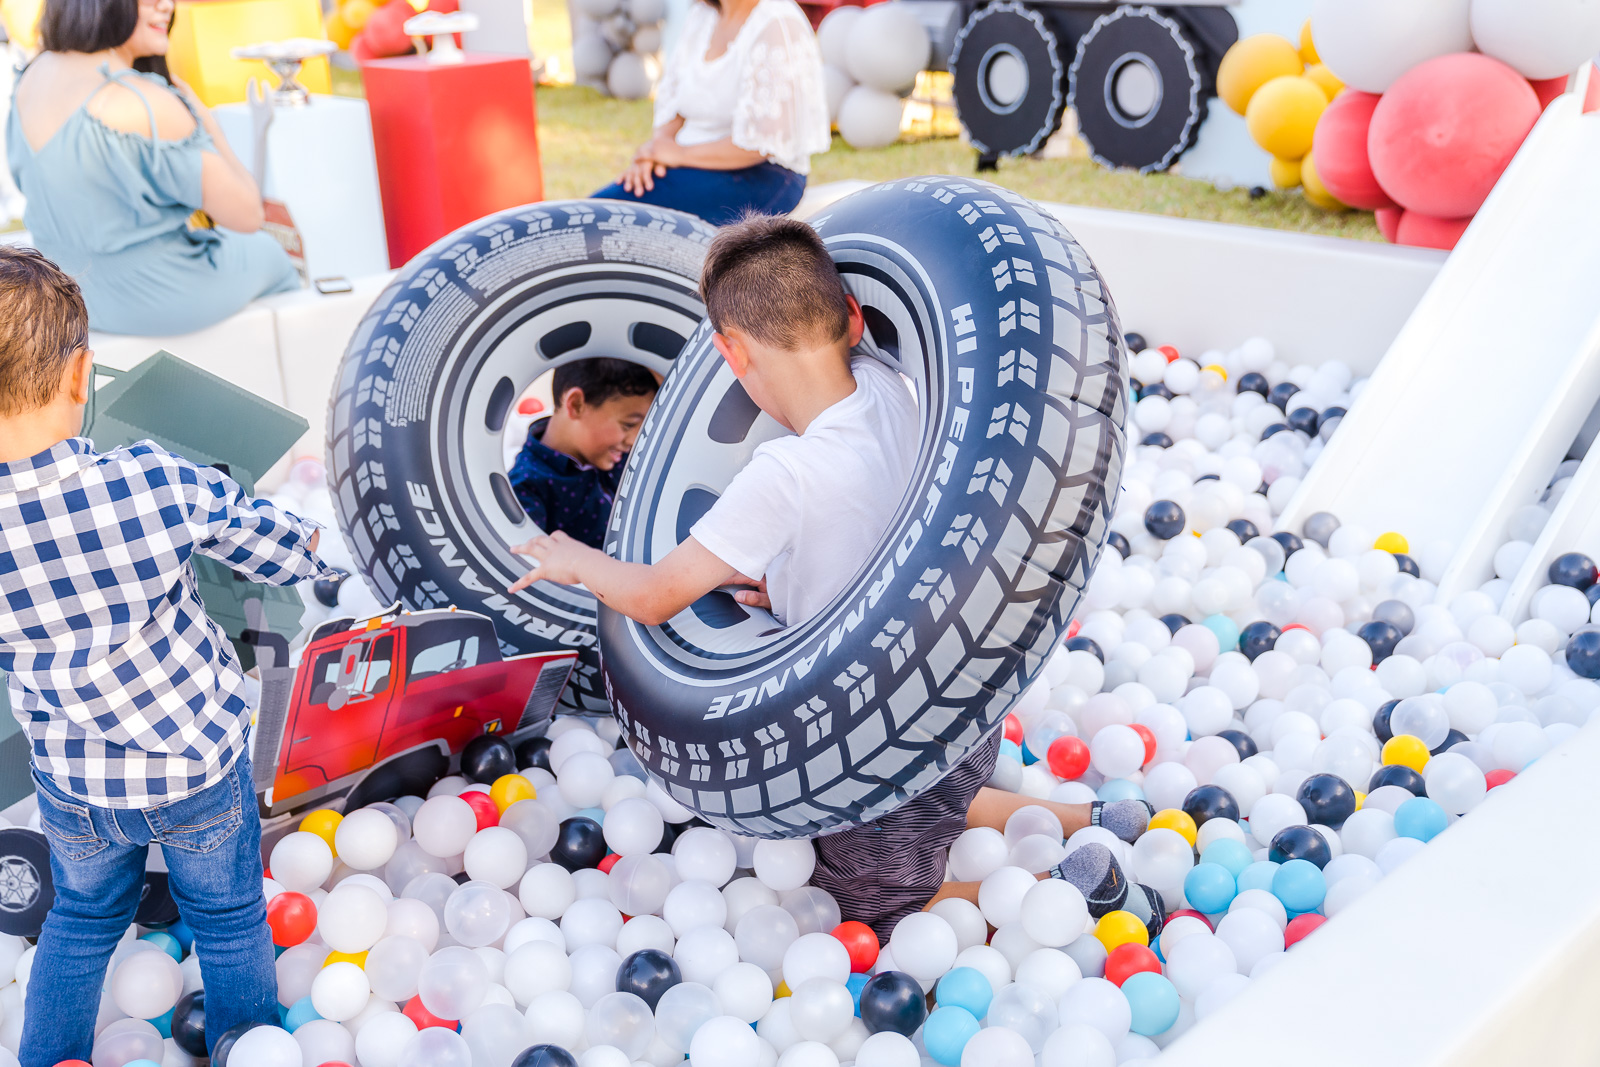 Orlando event photographer captures luxury truck themed birthday party with custom ball pit